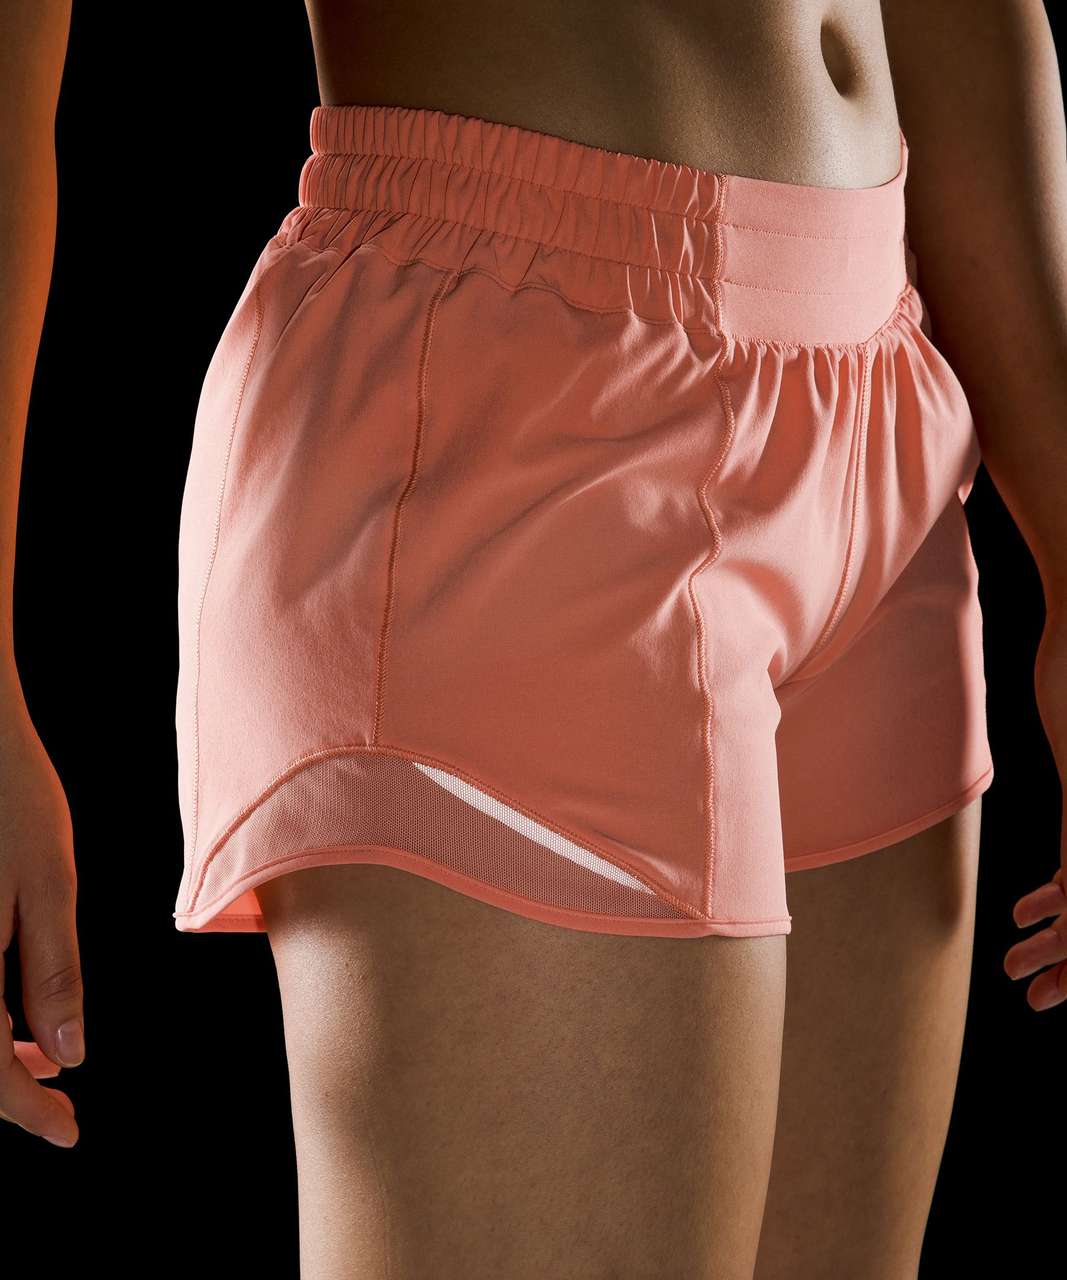 Lululemon Hotty Hot Low-Rise Lined Short 4" - Sunny Coral